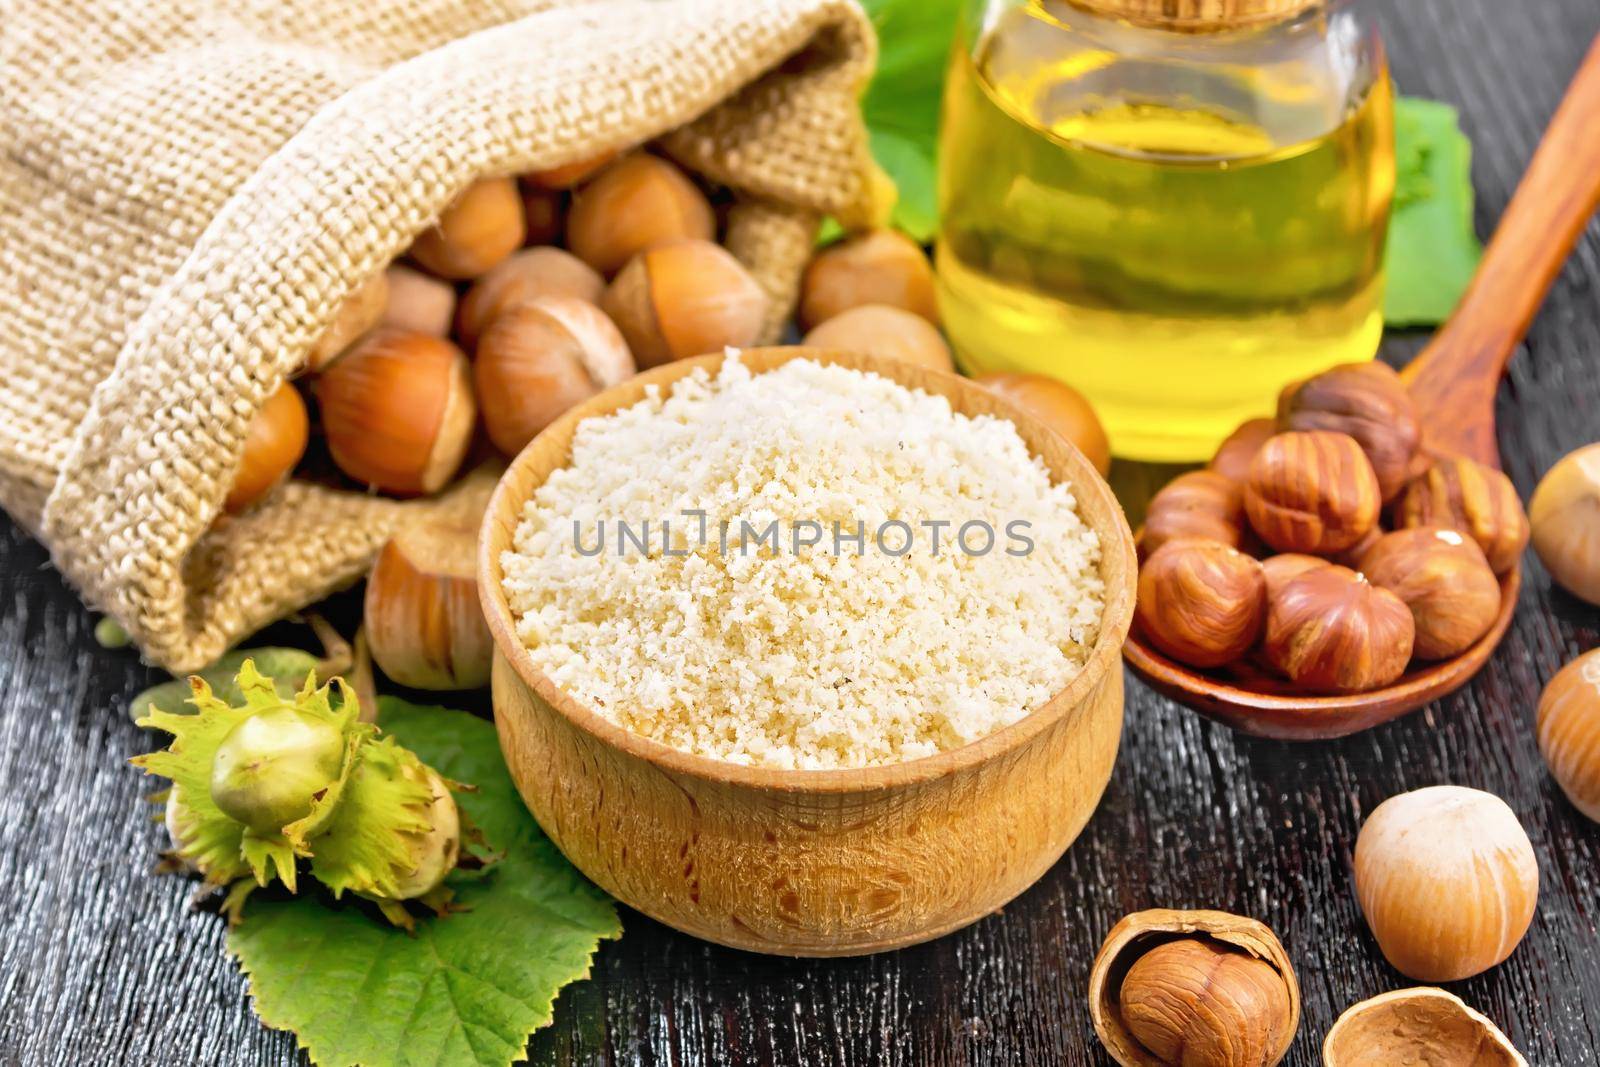 Hazelnut flour in a bowl, nuts in bag, a spoon, oil in glass jar and filbert branch with green leaves on wooden board background